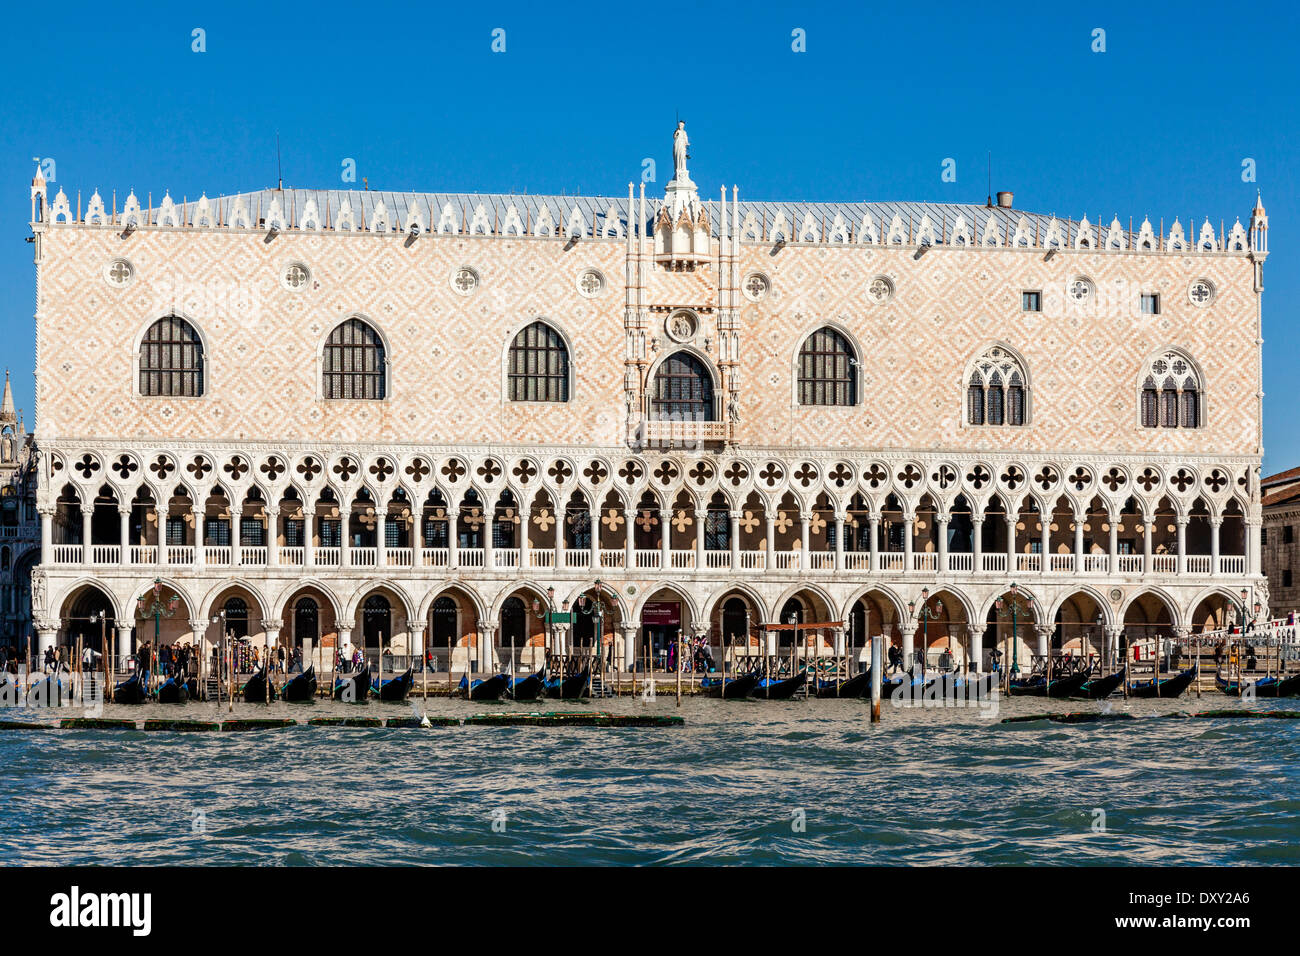 The Doge's Palace (Palazzo Ducale) St Mark's Square, Venice, Italy Stock Photo